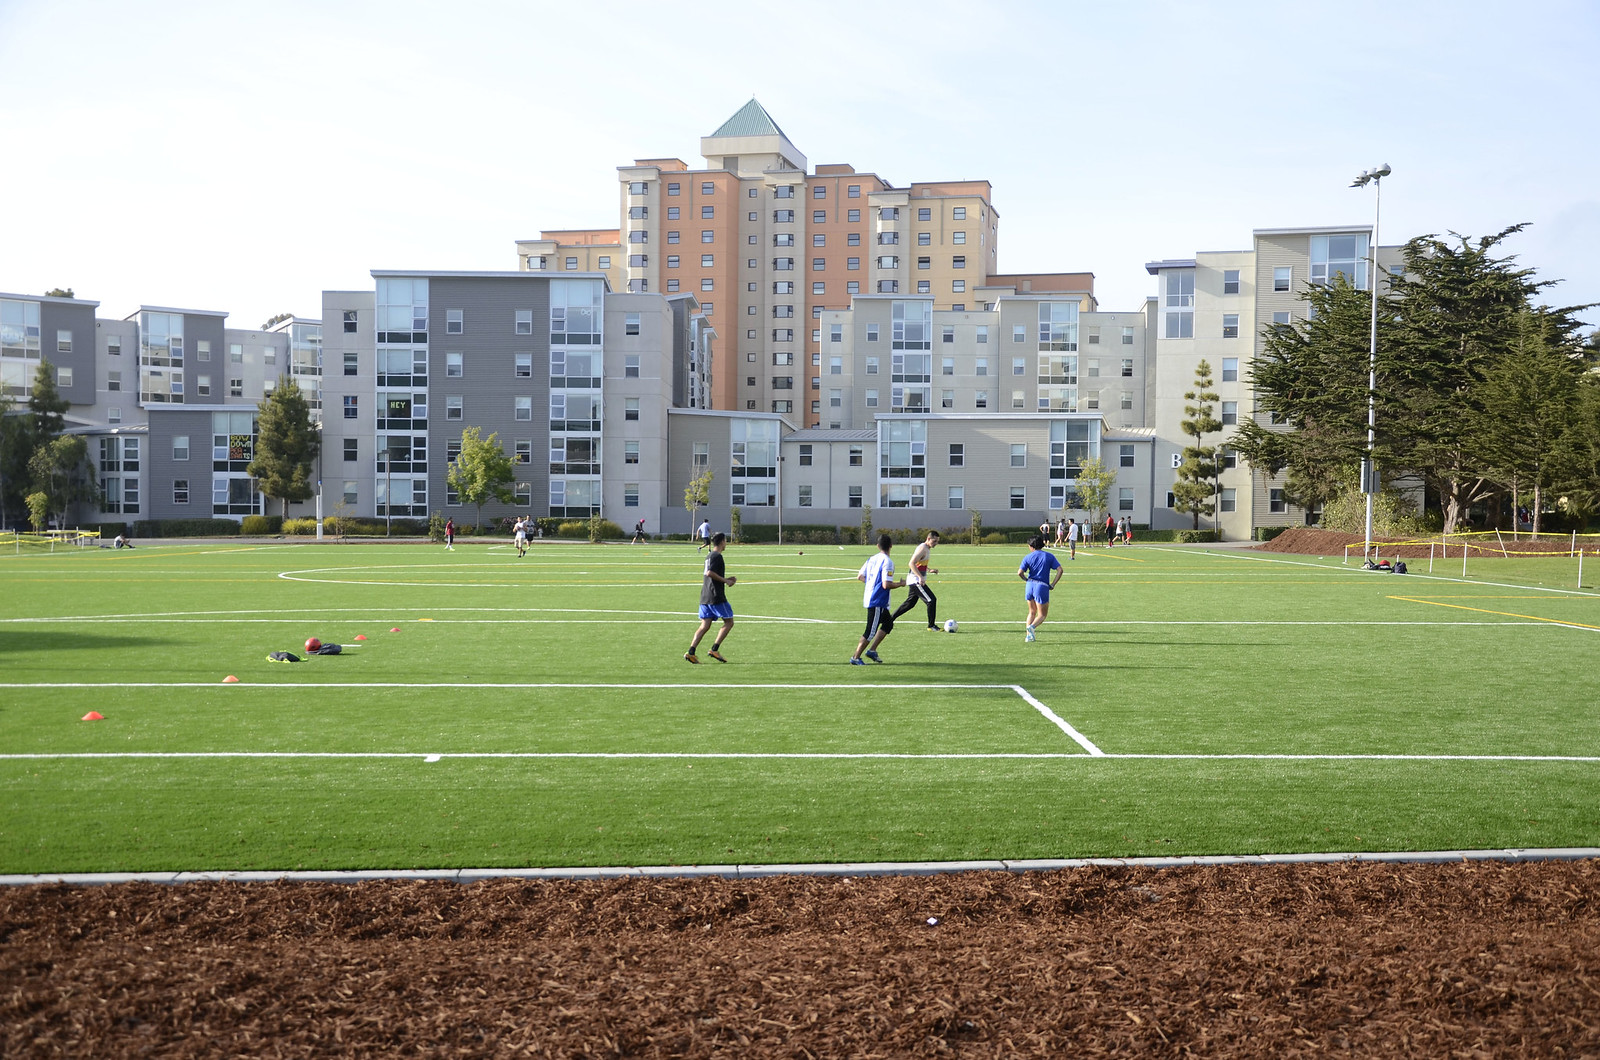 SF State's new recreation area and field is done being constructed and is now ready to be enjoyed by SF State students and visitors. Photo by Virginia Tieman / Xpress